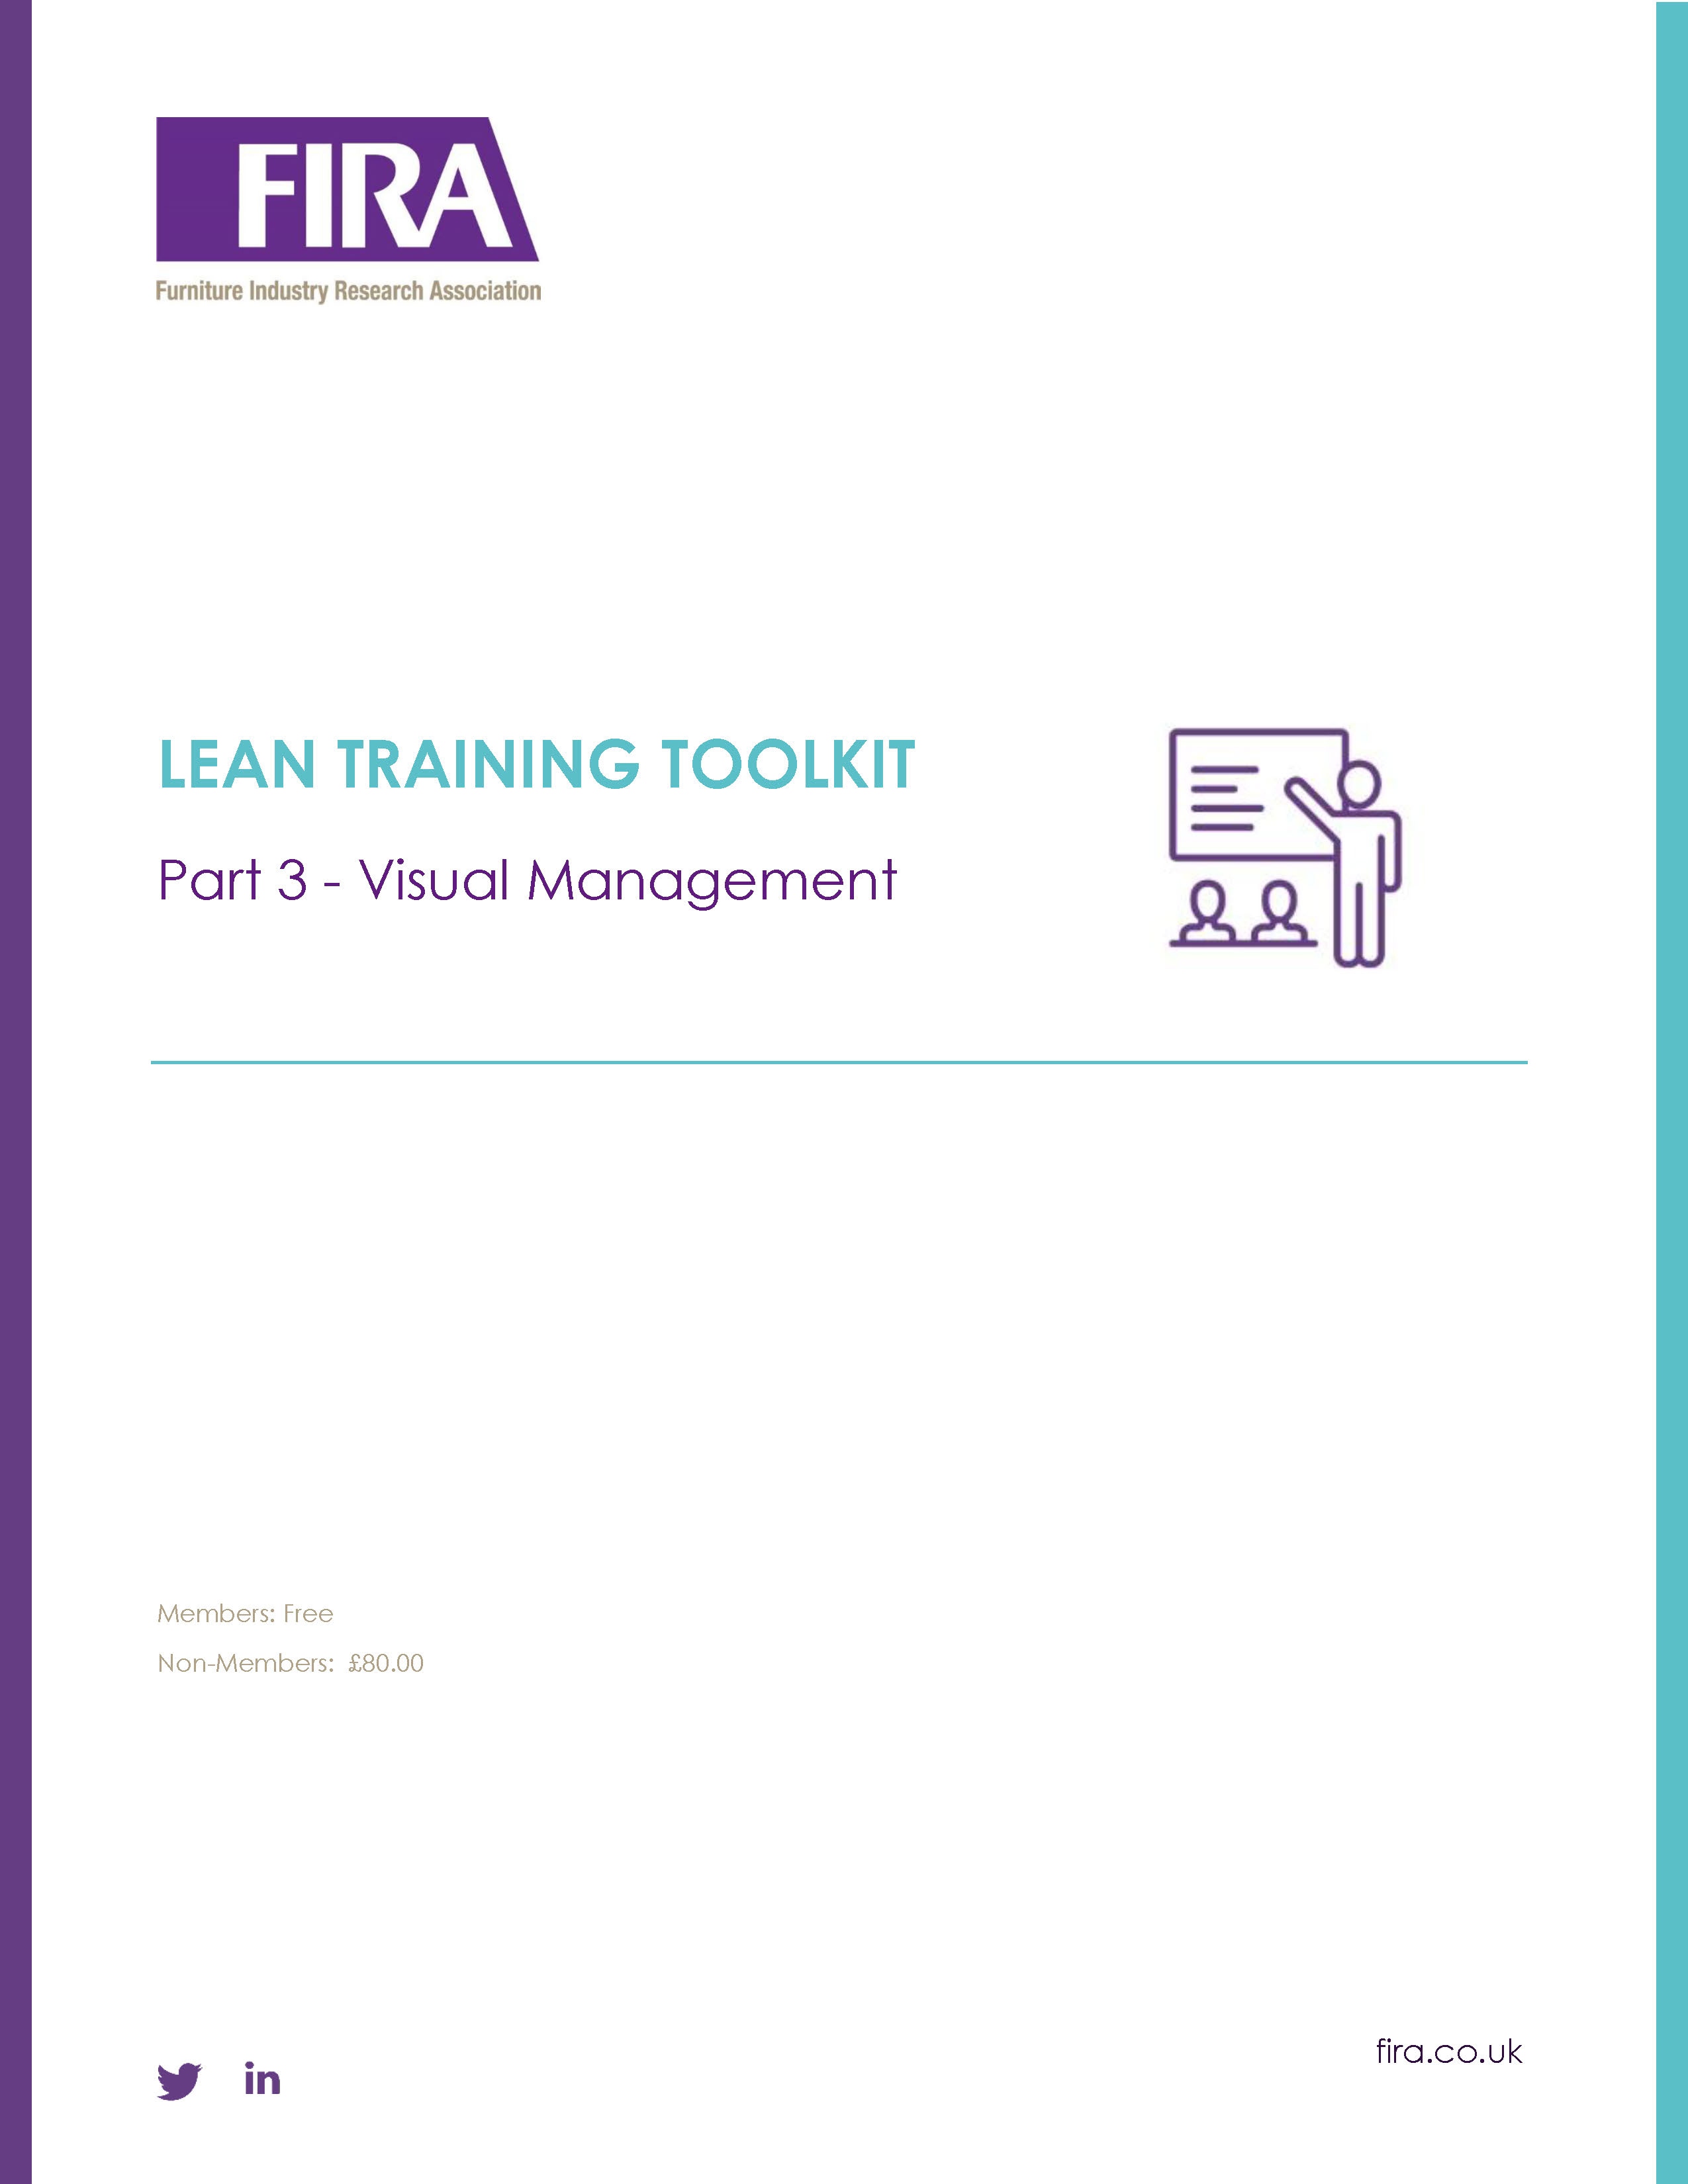 Lean Manufacturing Training Toolkit - Part 3 - Visual Management